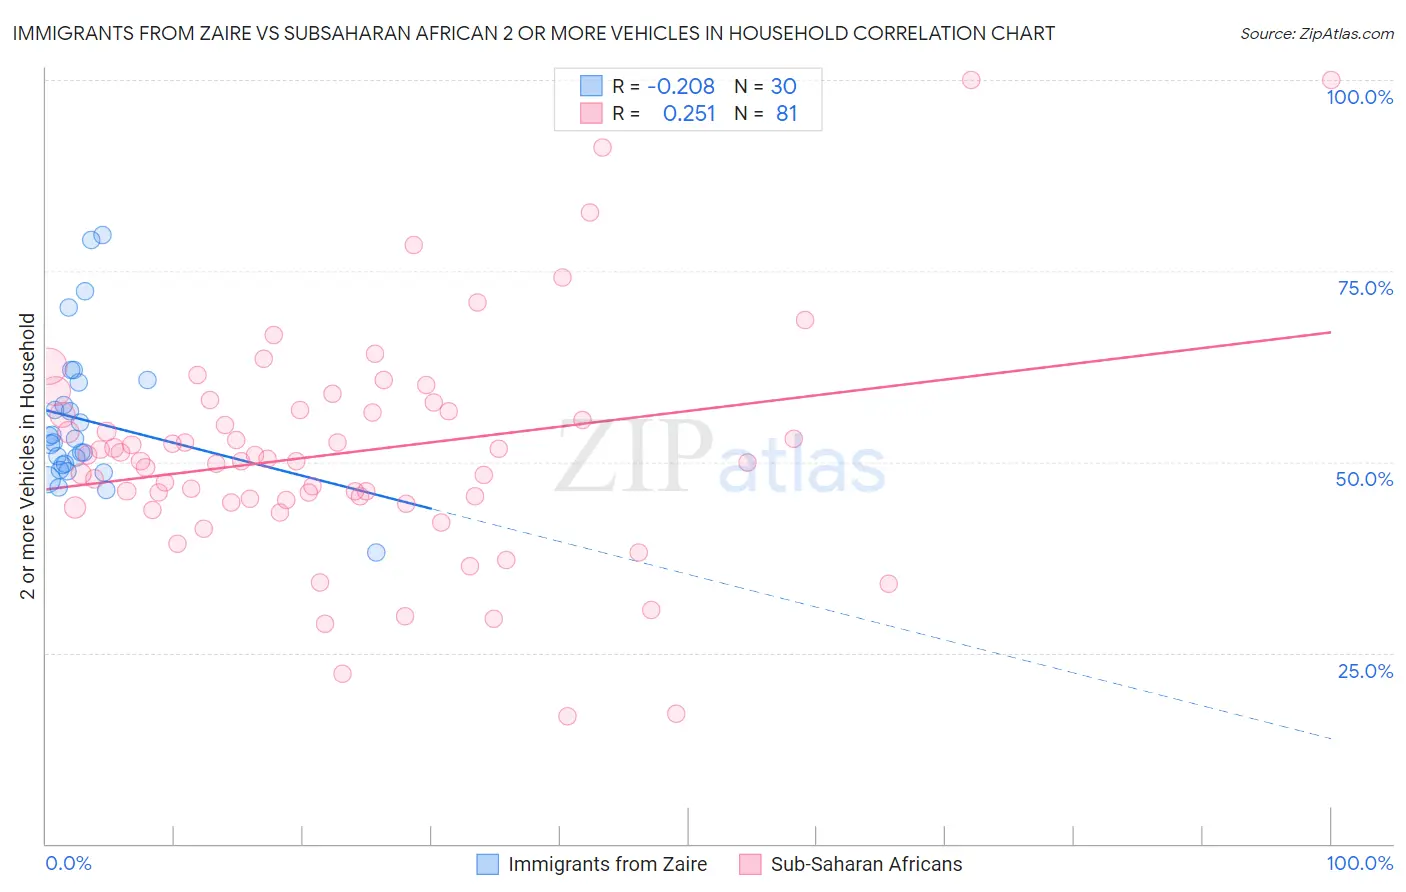 Immigrants from Zaire vs Subsaharan African 2 or more Vehicles in Household